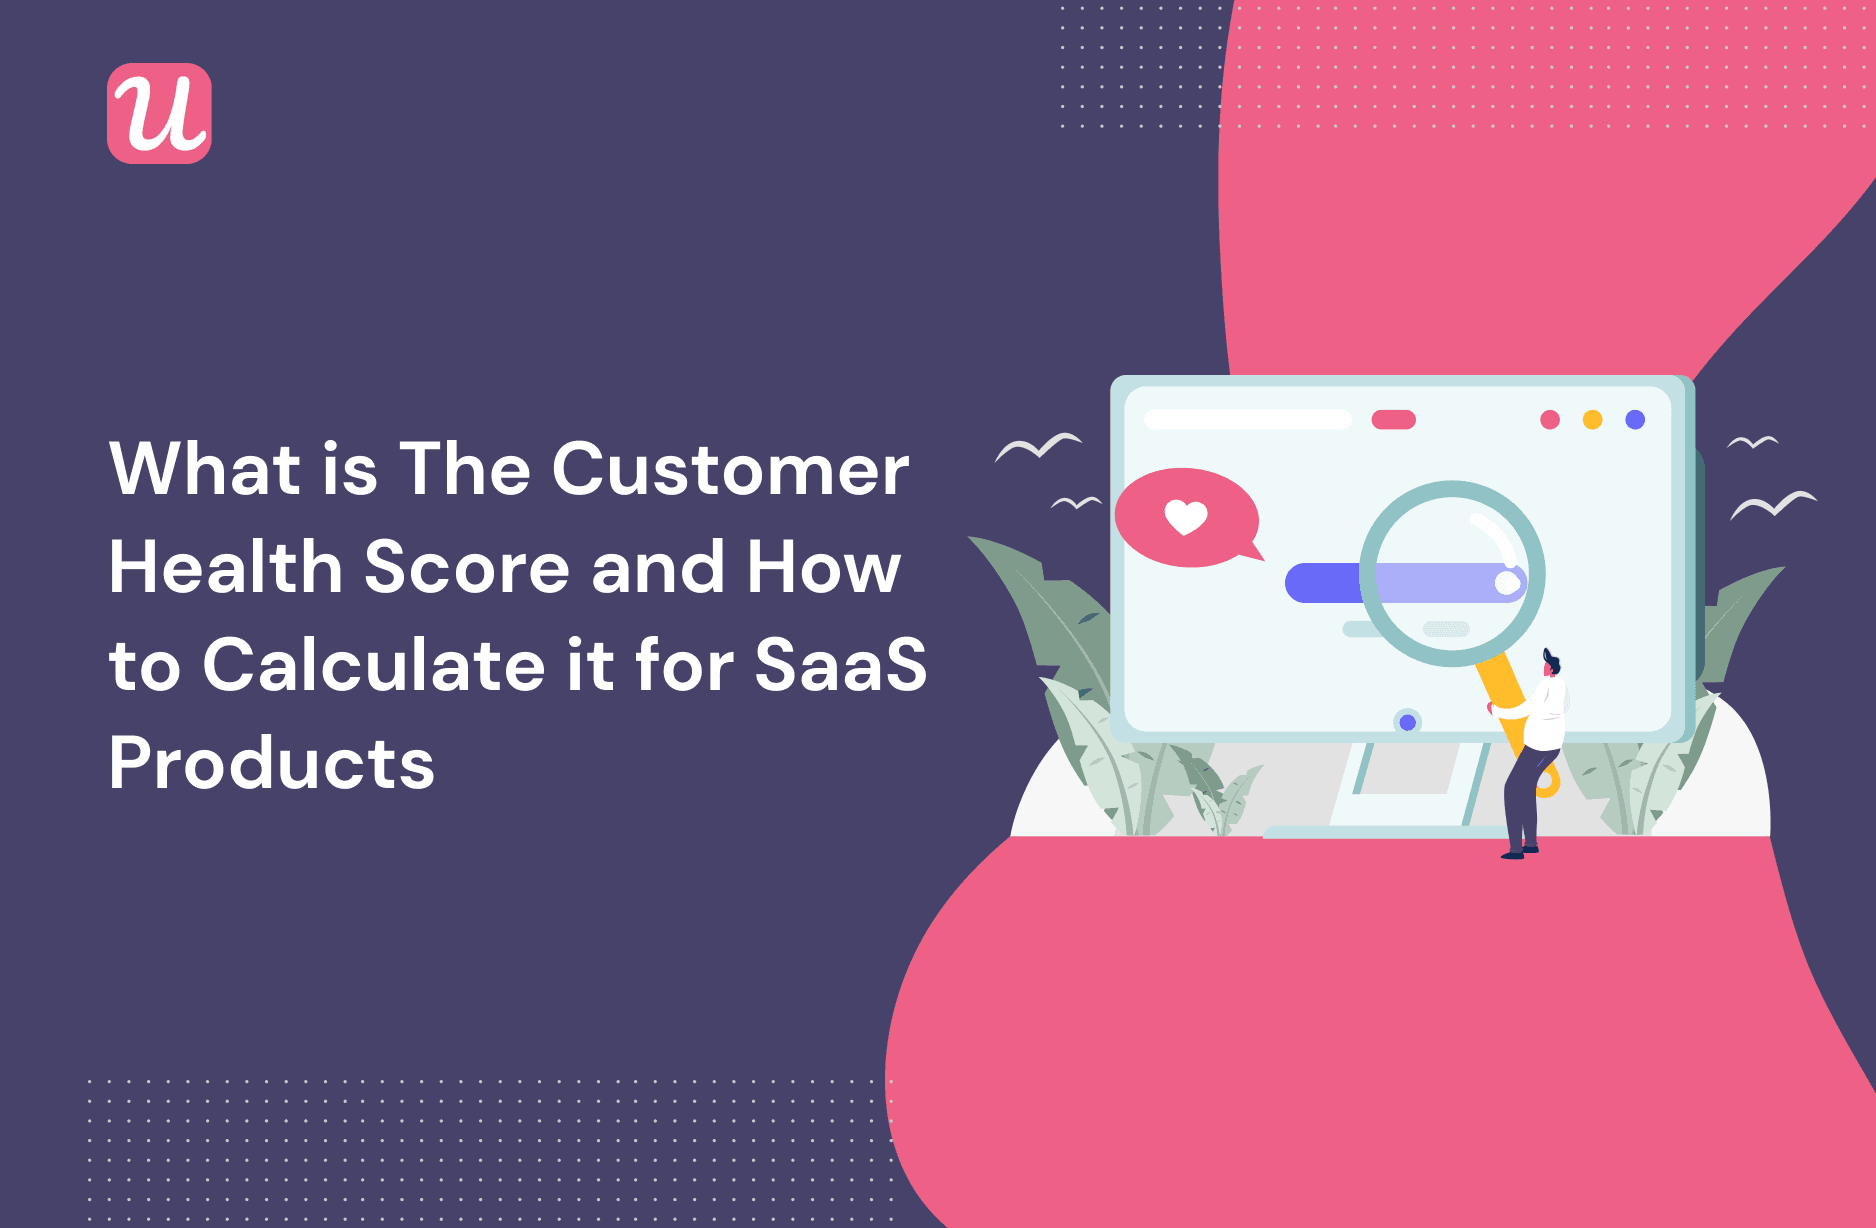 What Is The Customer Health Score And How To Calculate It For SaaS Products